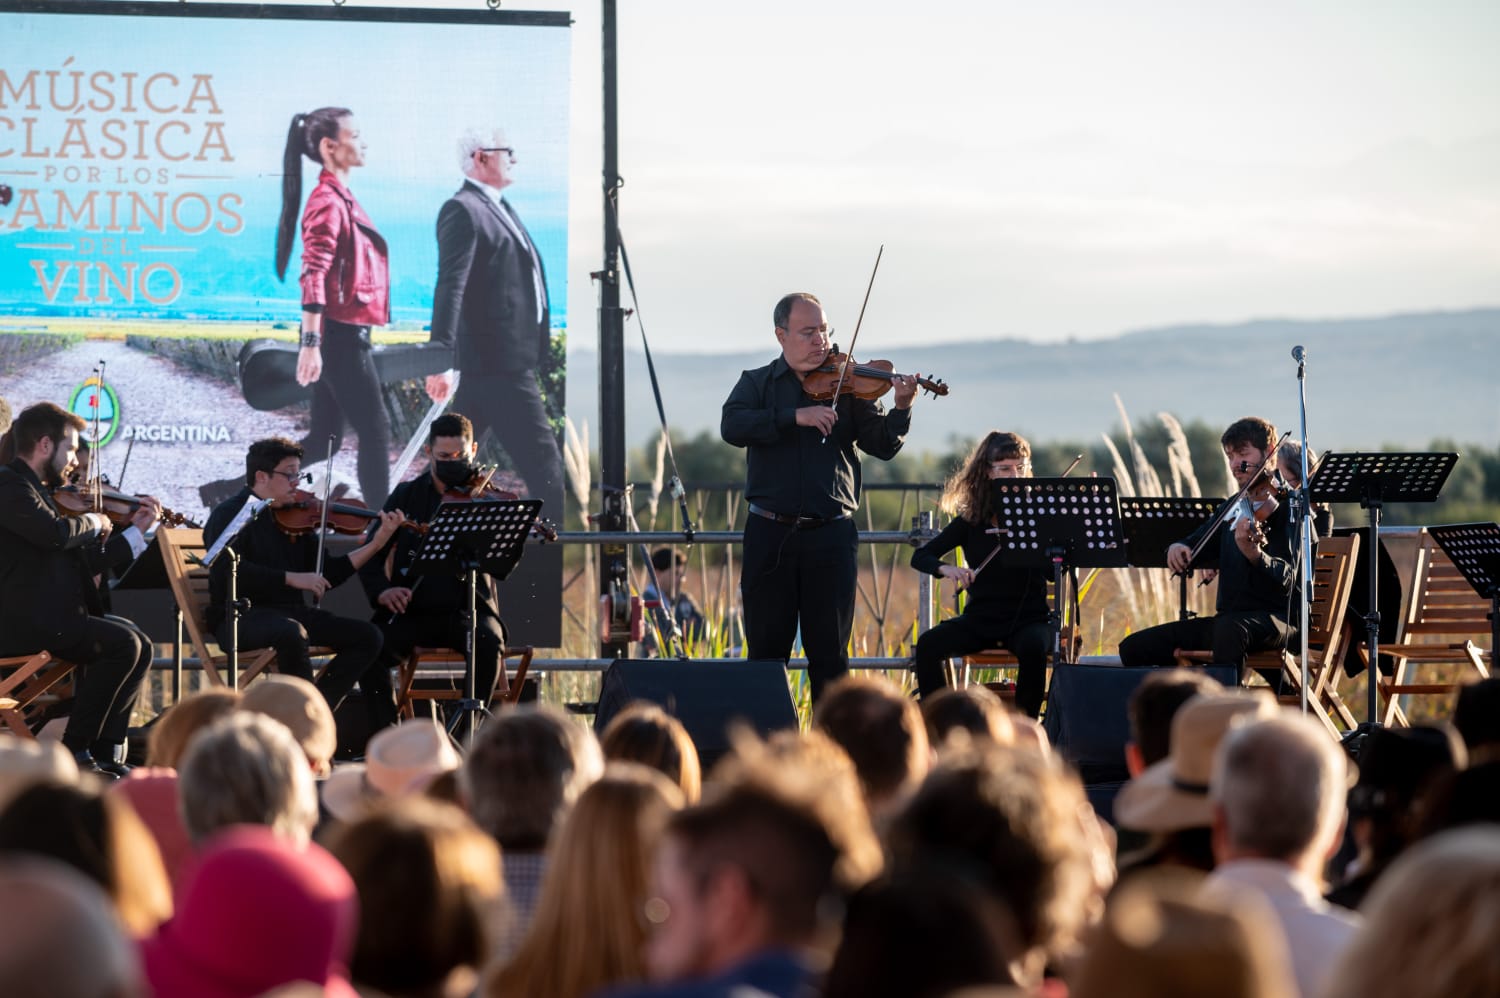 Another successful edition of Classical Music along the Wine Routes in Mendoza